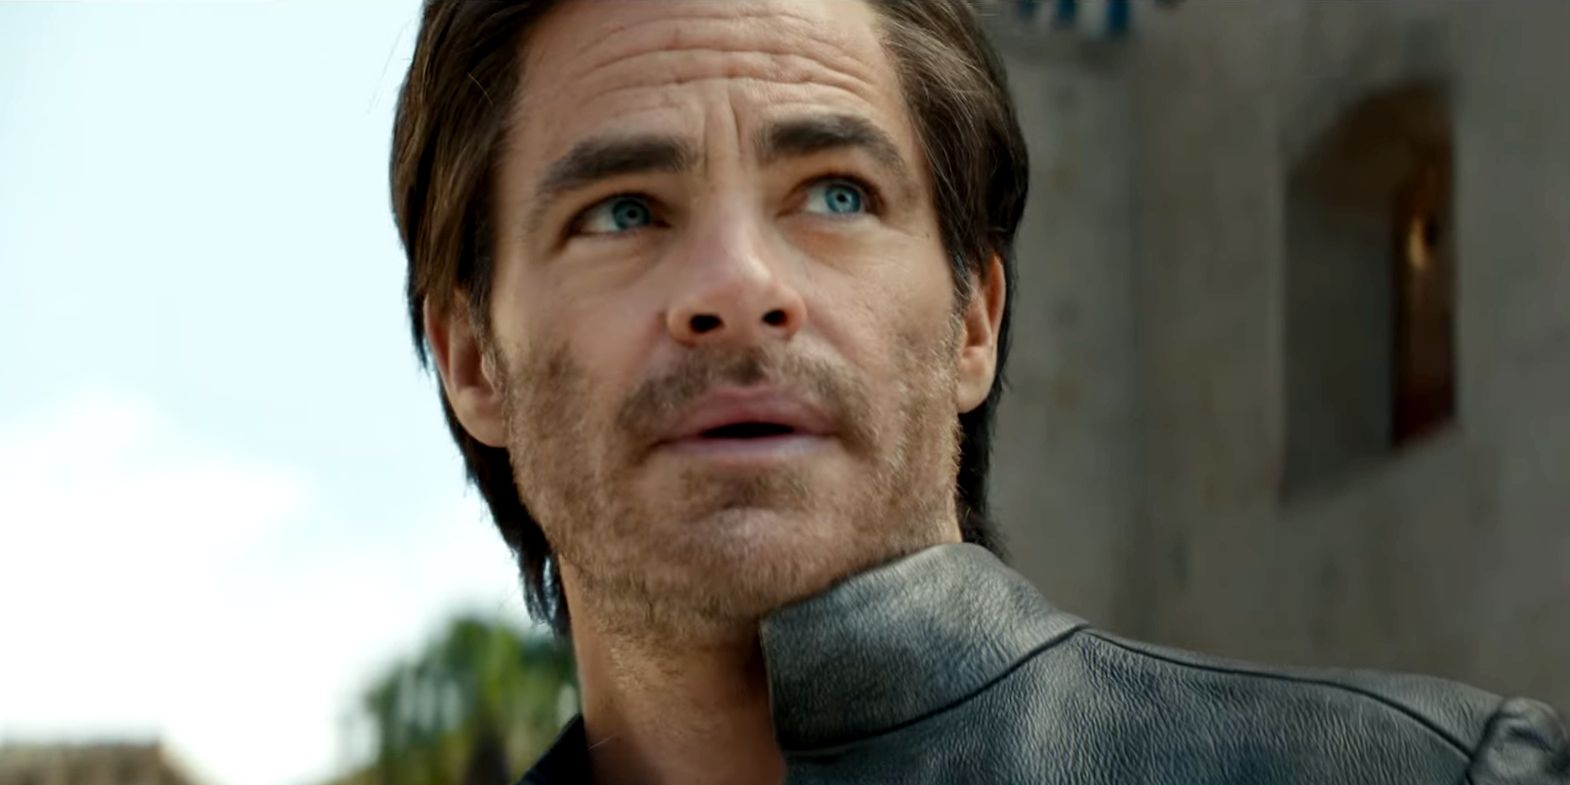  DUNGEONS & DRAGONS: HONOR AMONG THIEVES : Chris Pine, Michelle  Rodriguez, Regé-Jean Page: Movies & TV